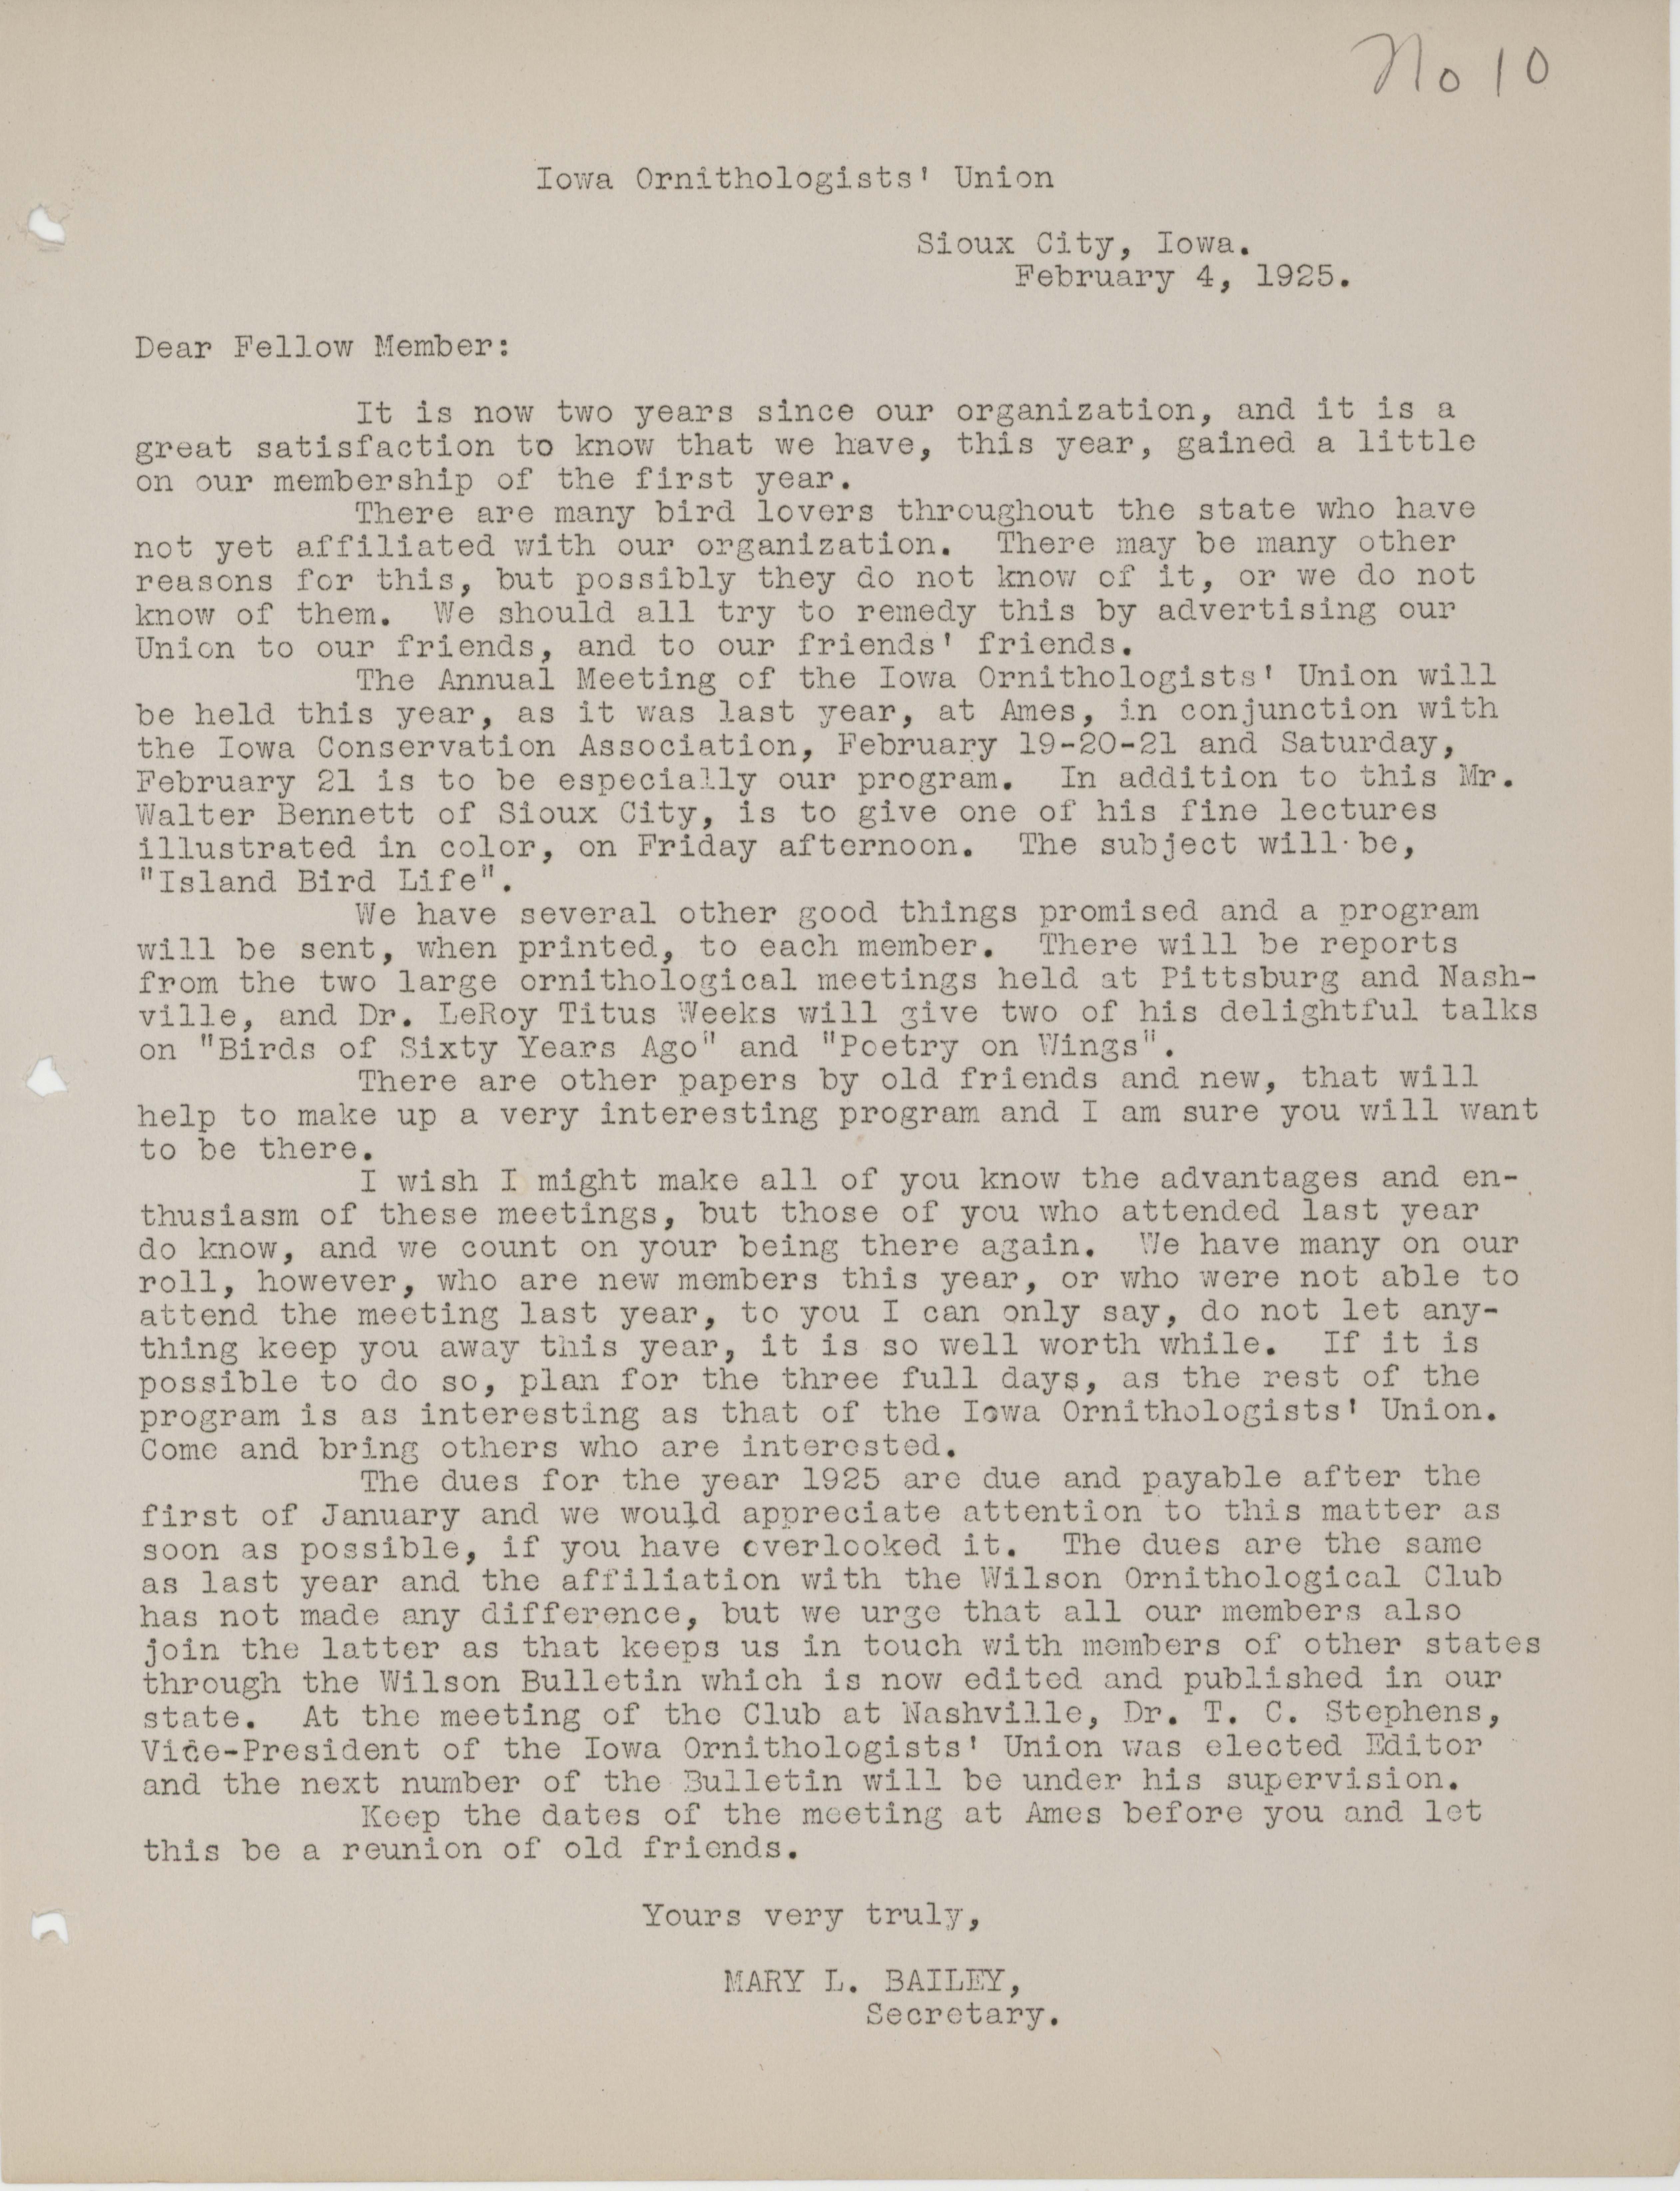 Letter to members of the Iowa Ornithologists' Union regarding the annual meeting, February 4, 1925